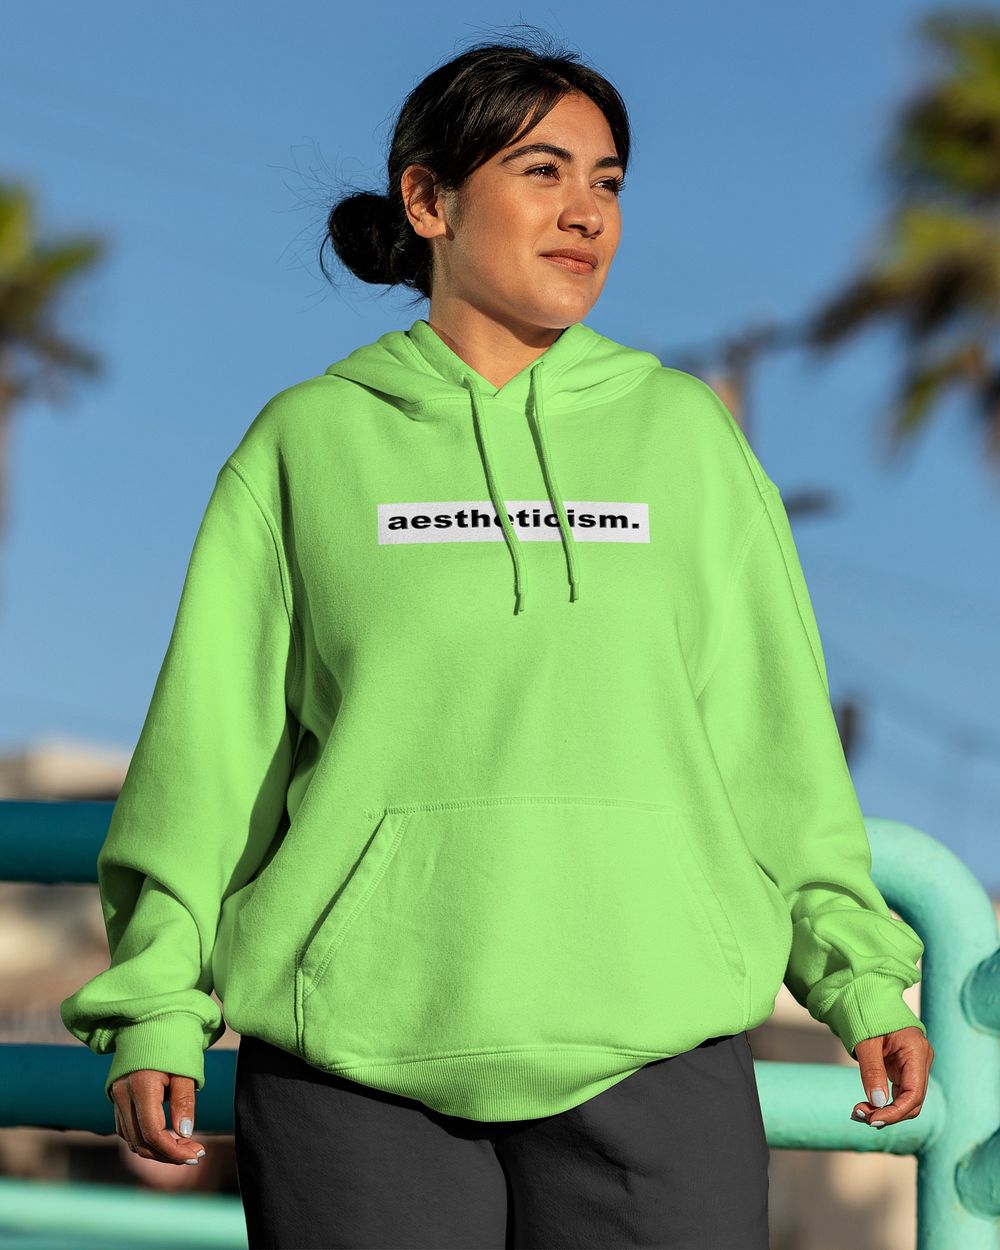 Woman wearing a streetwear hoodie, neon green design with aestheticism text